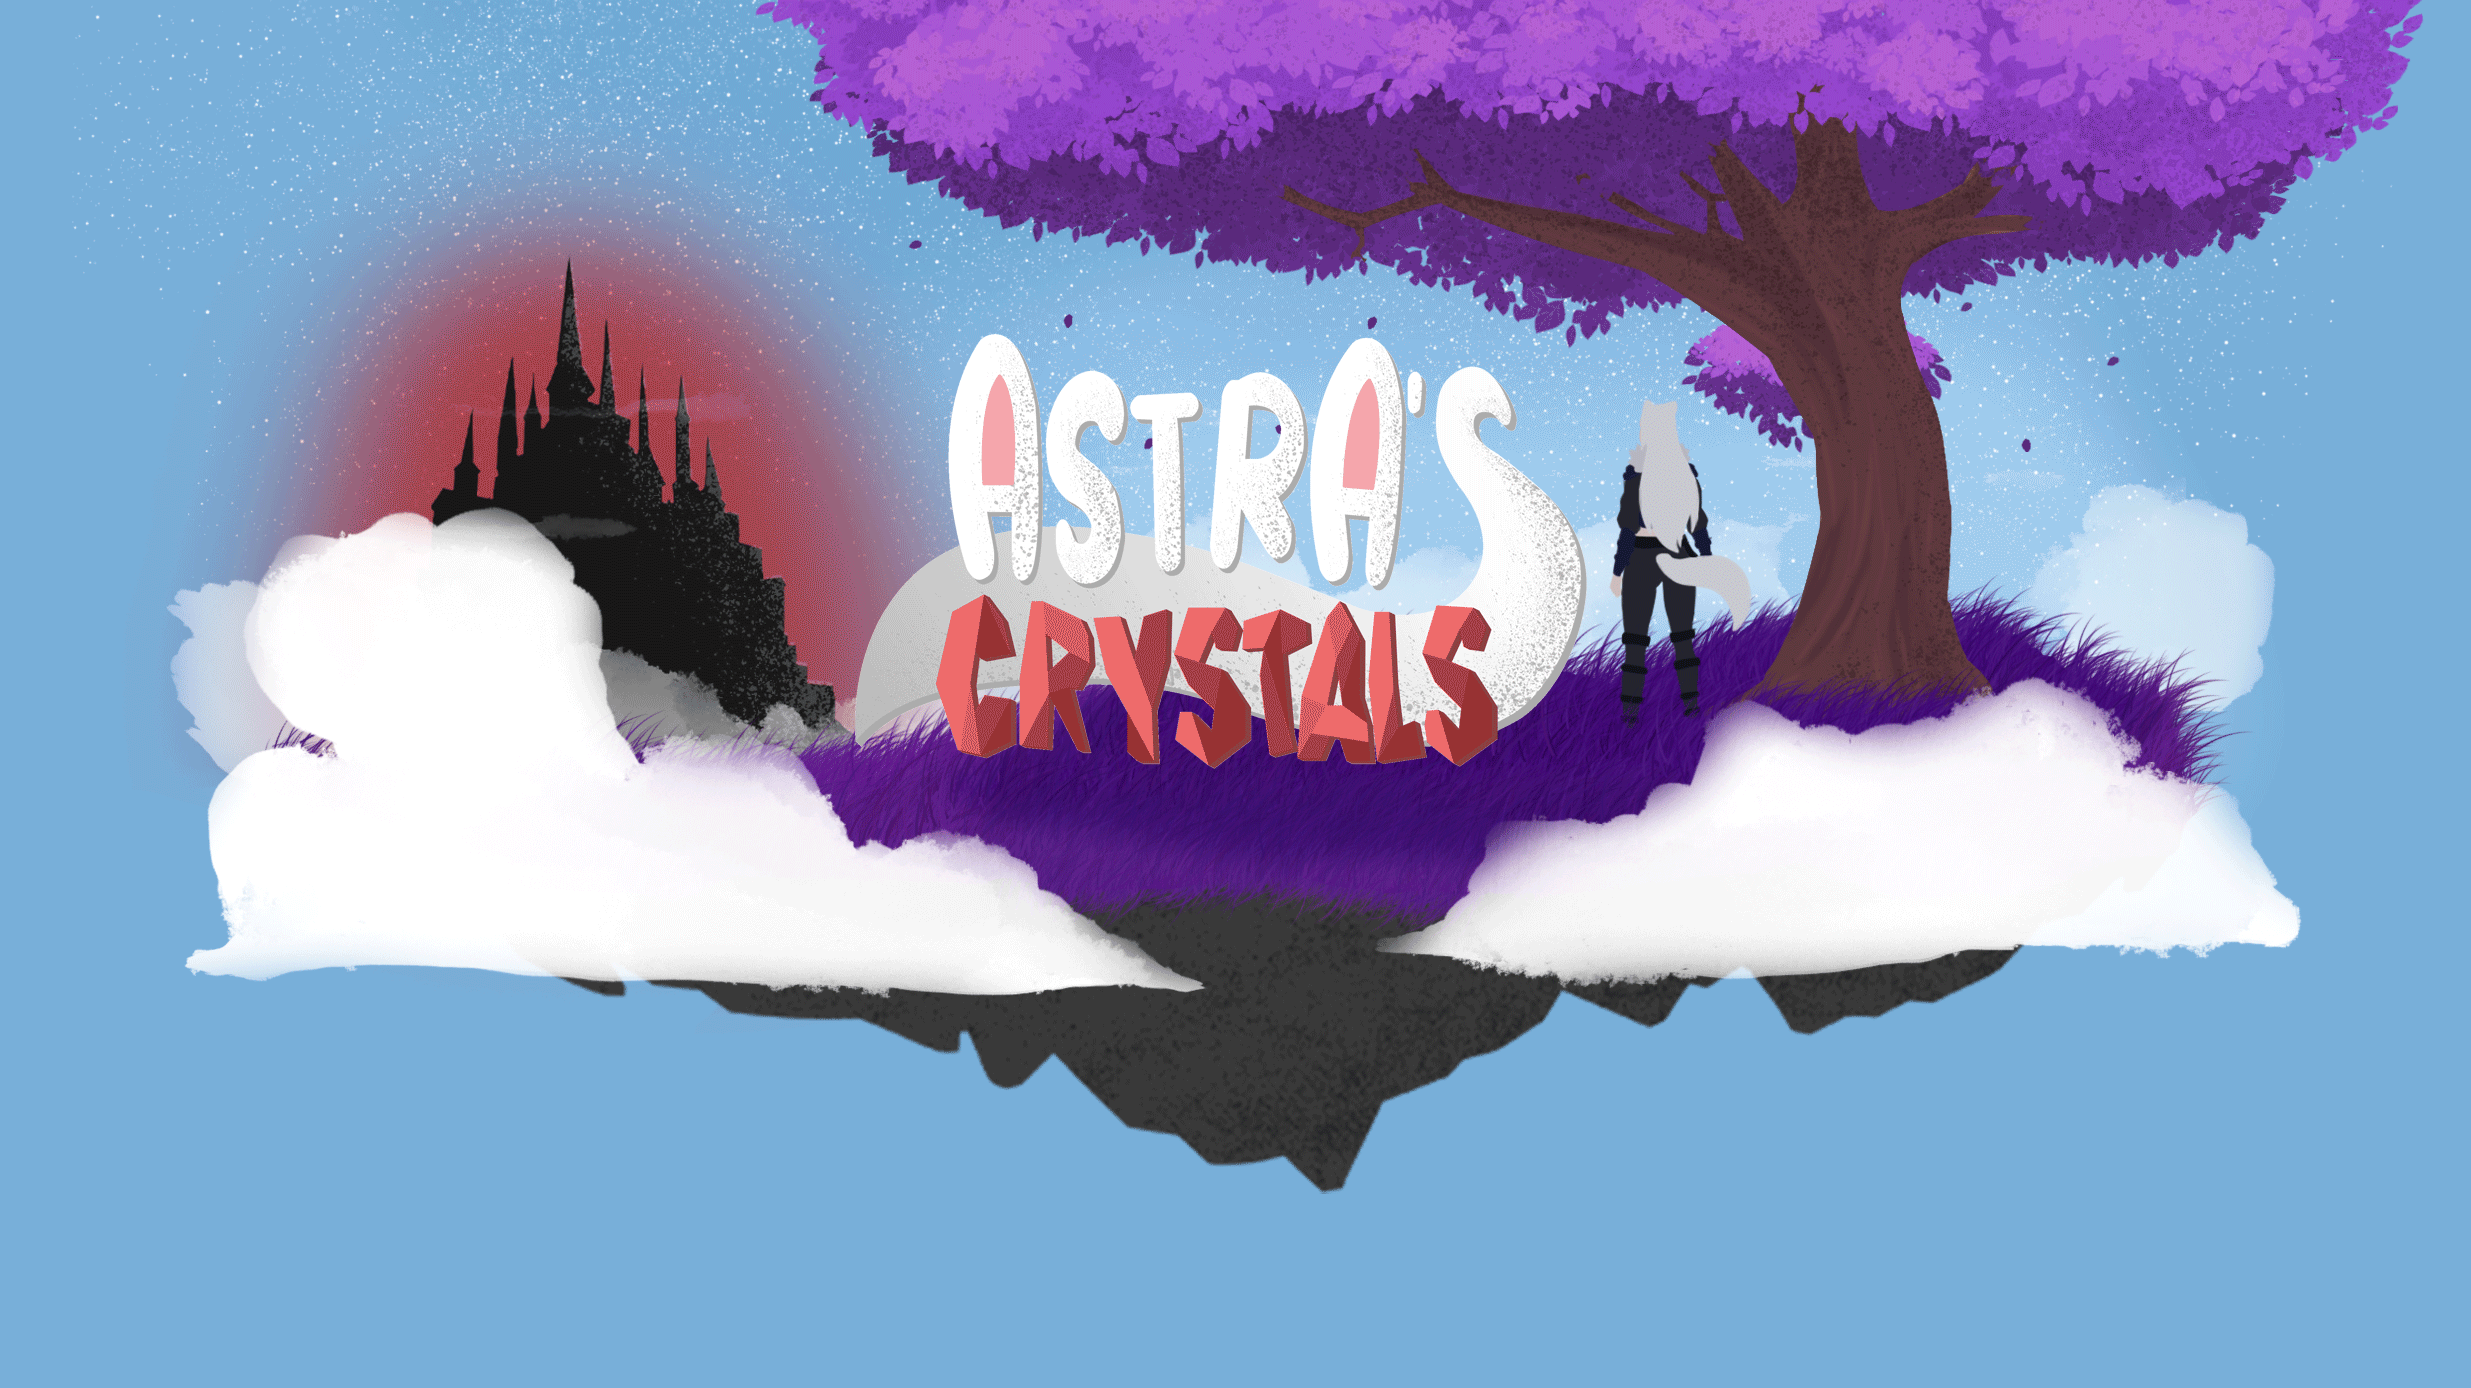 ASTRA'S CRYSTALS